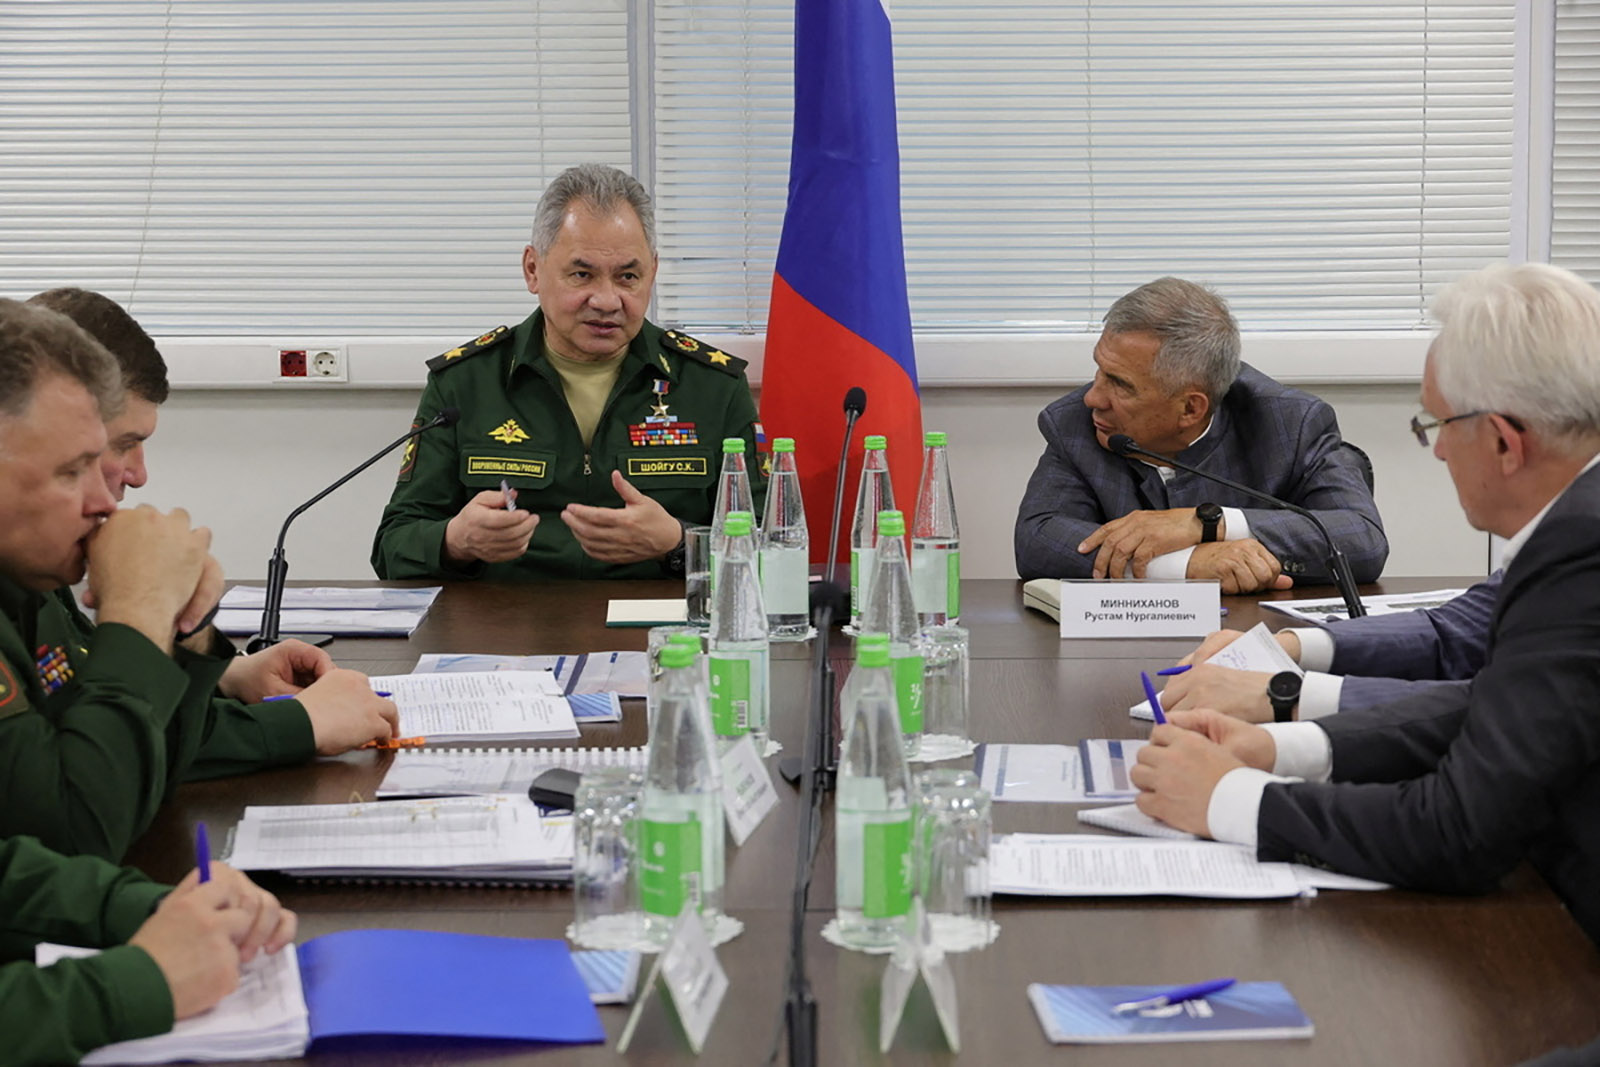 Russian Defence Minister Sergei Shoigu, center, attends a meeting as part of the inspection of defence industry enterprises, in the Republic of Tatarstan, Russia, in an image released on July 11. 